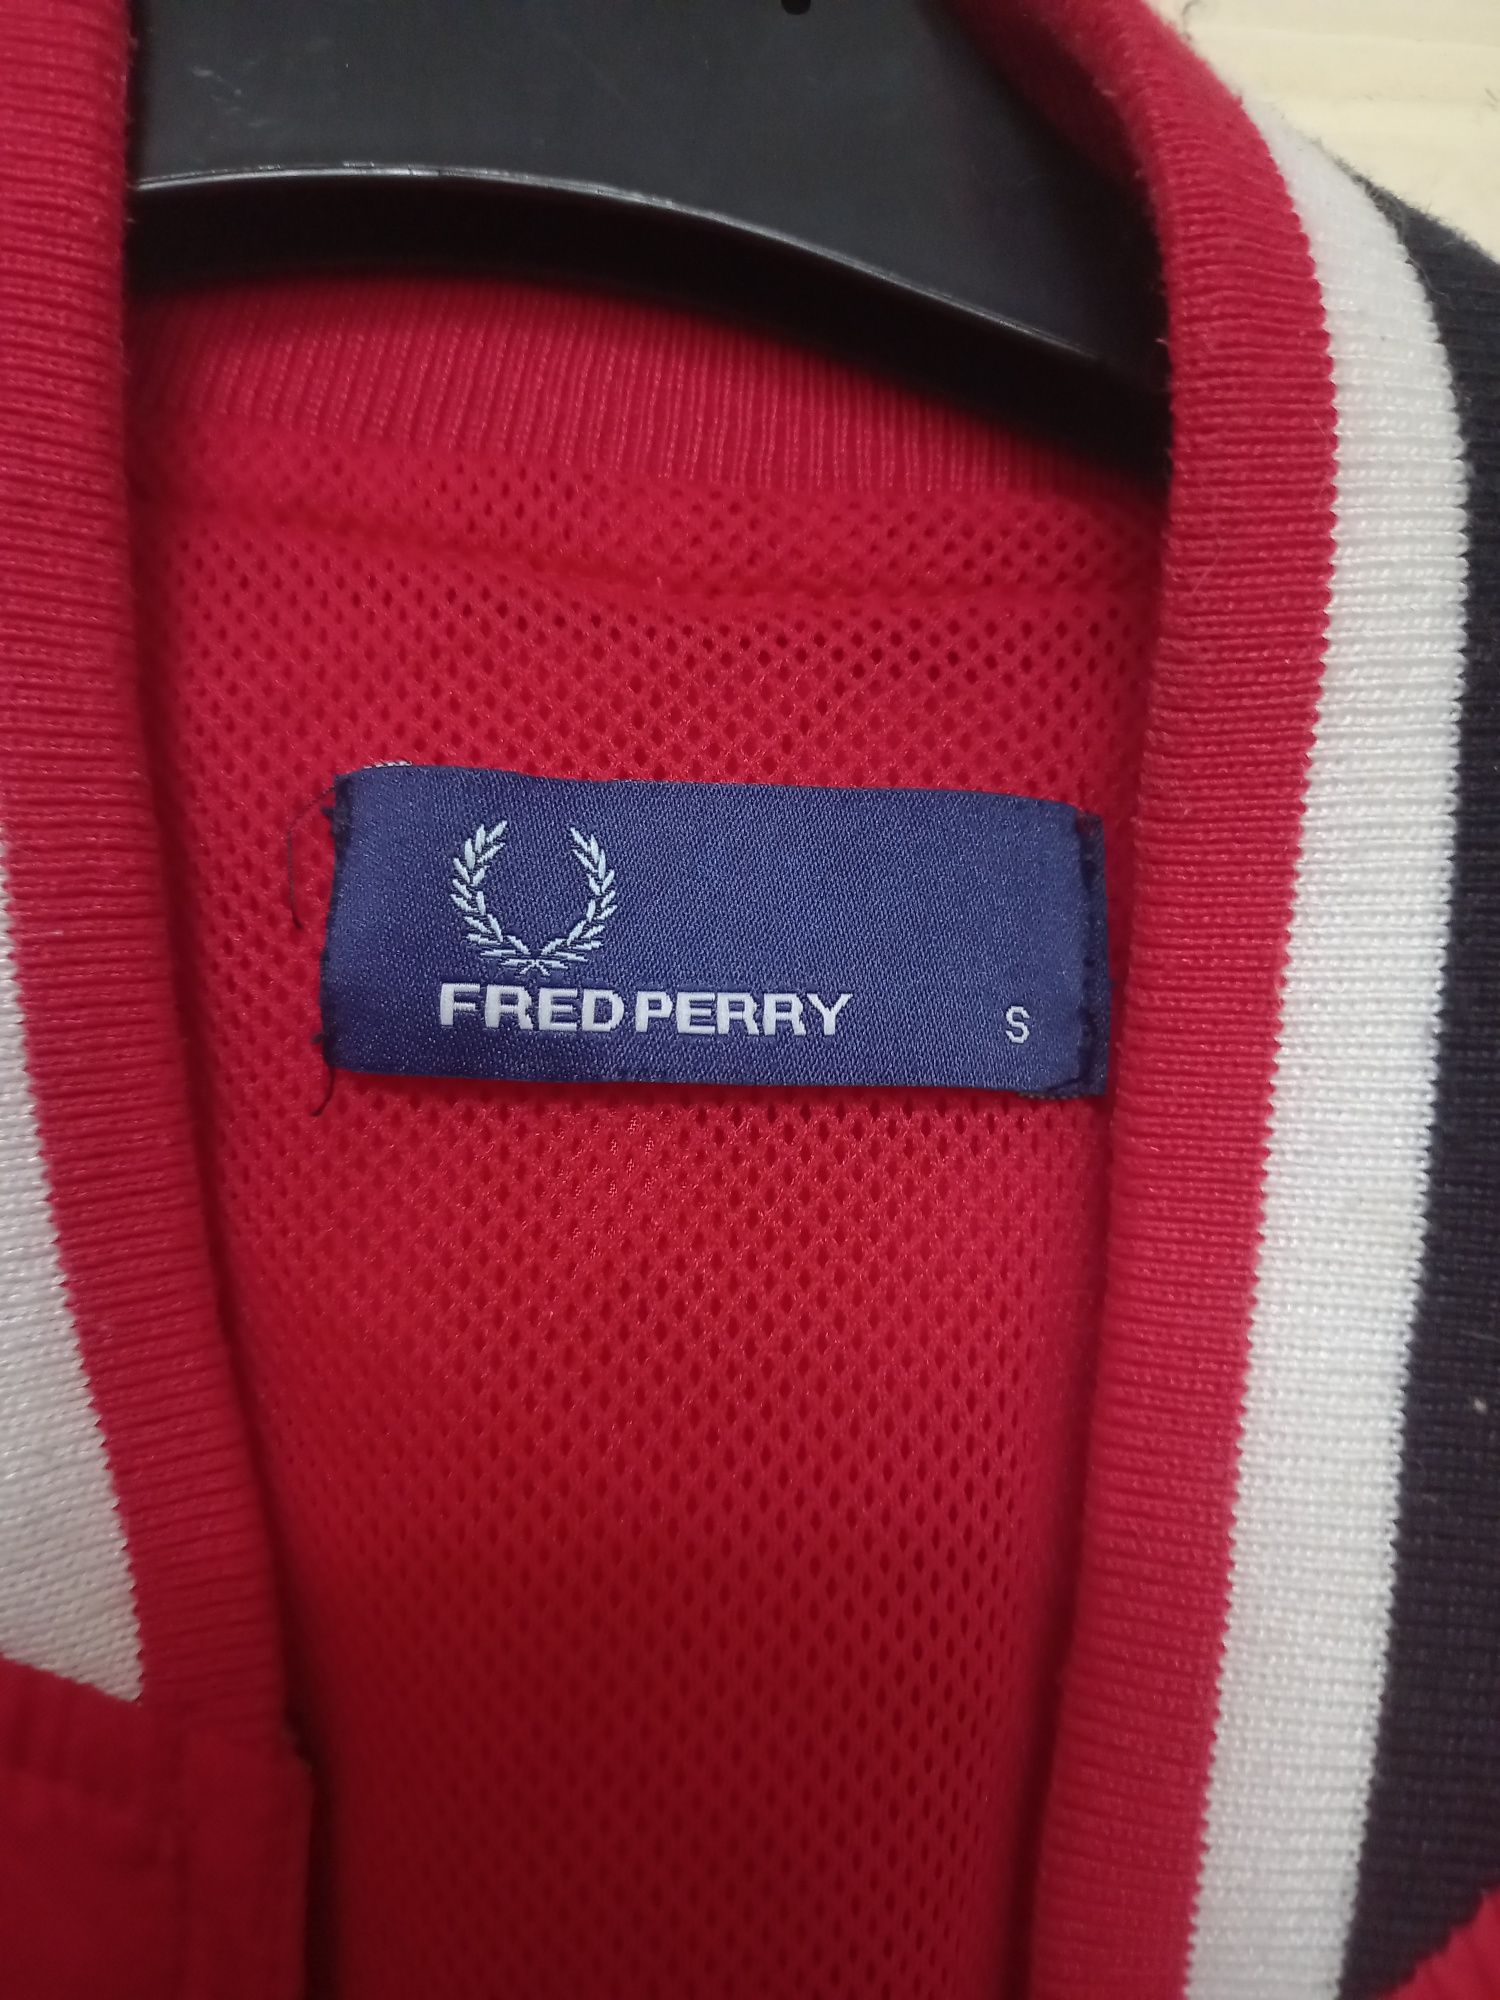 fred perry bomber tamanho S